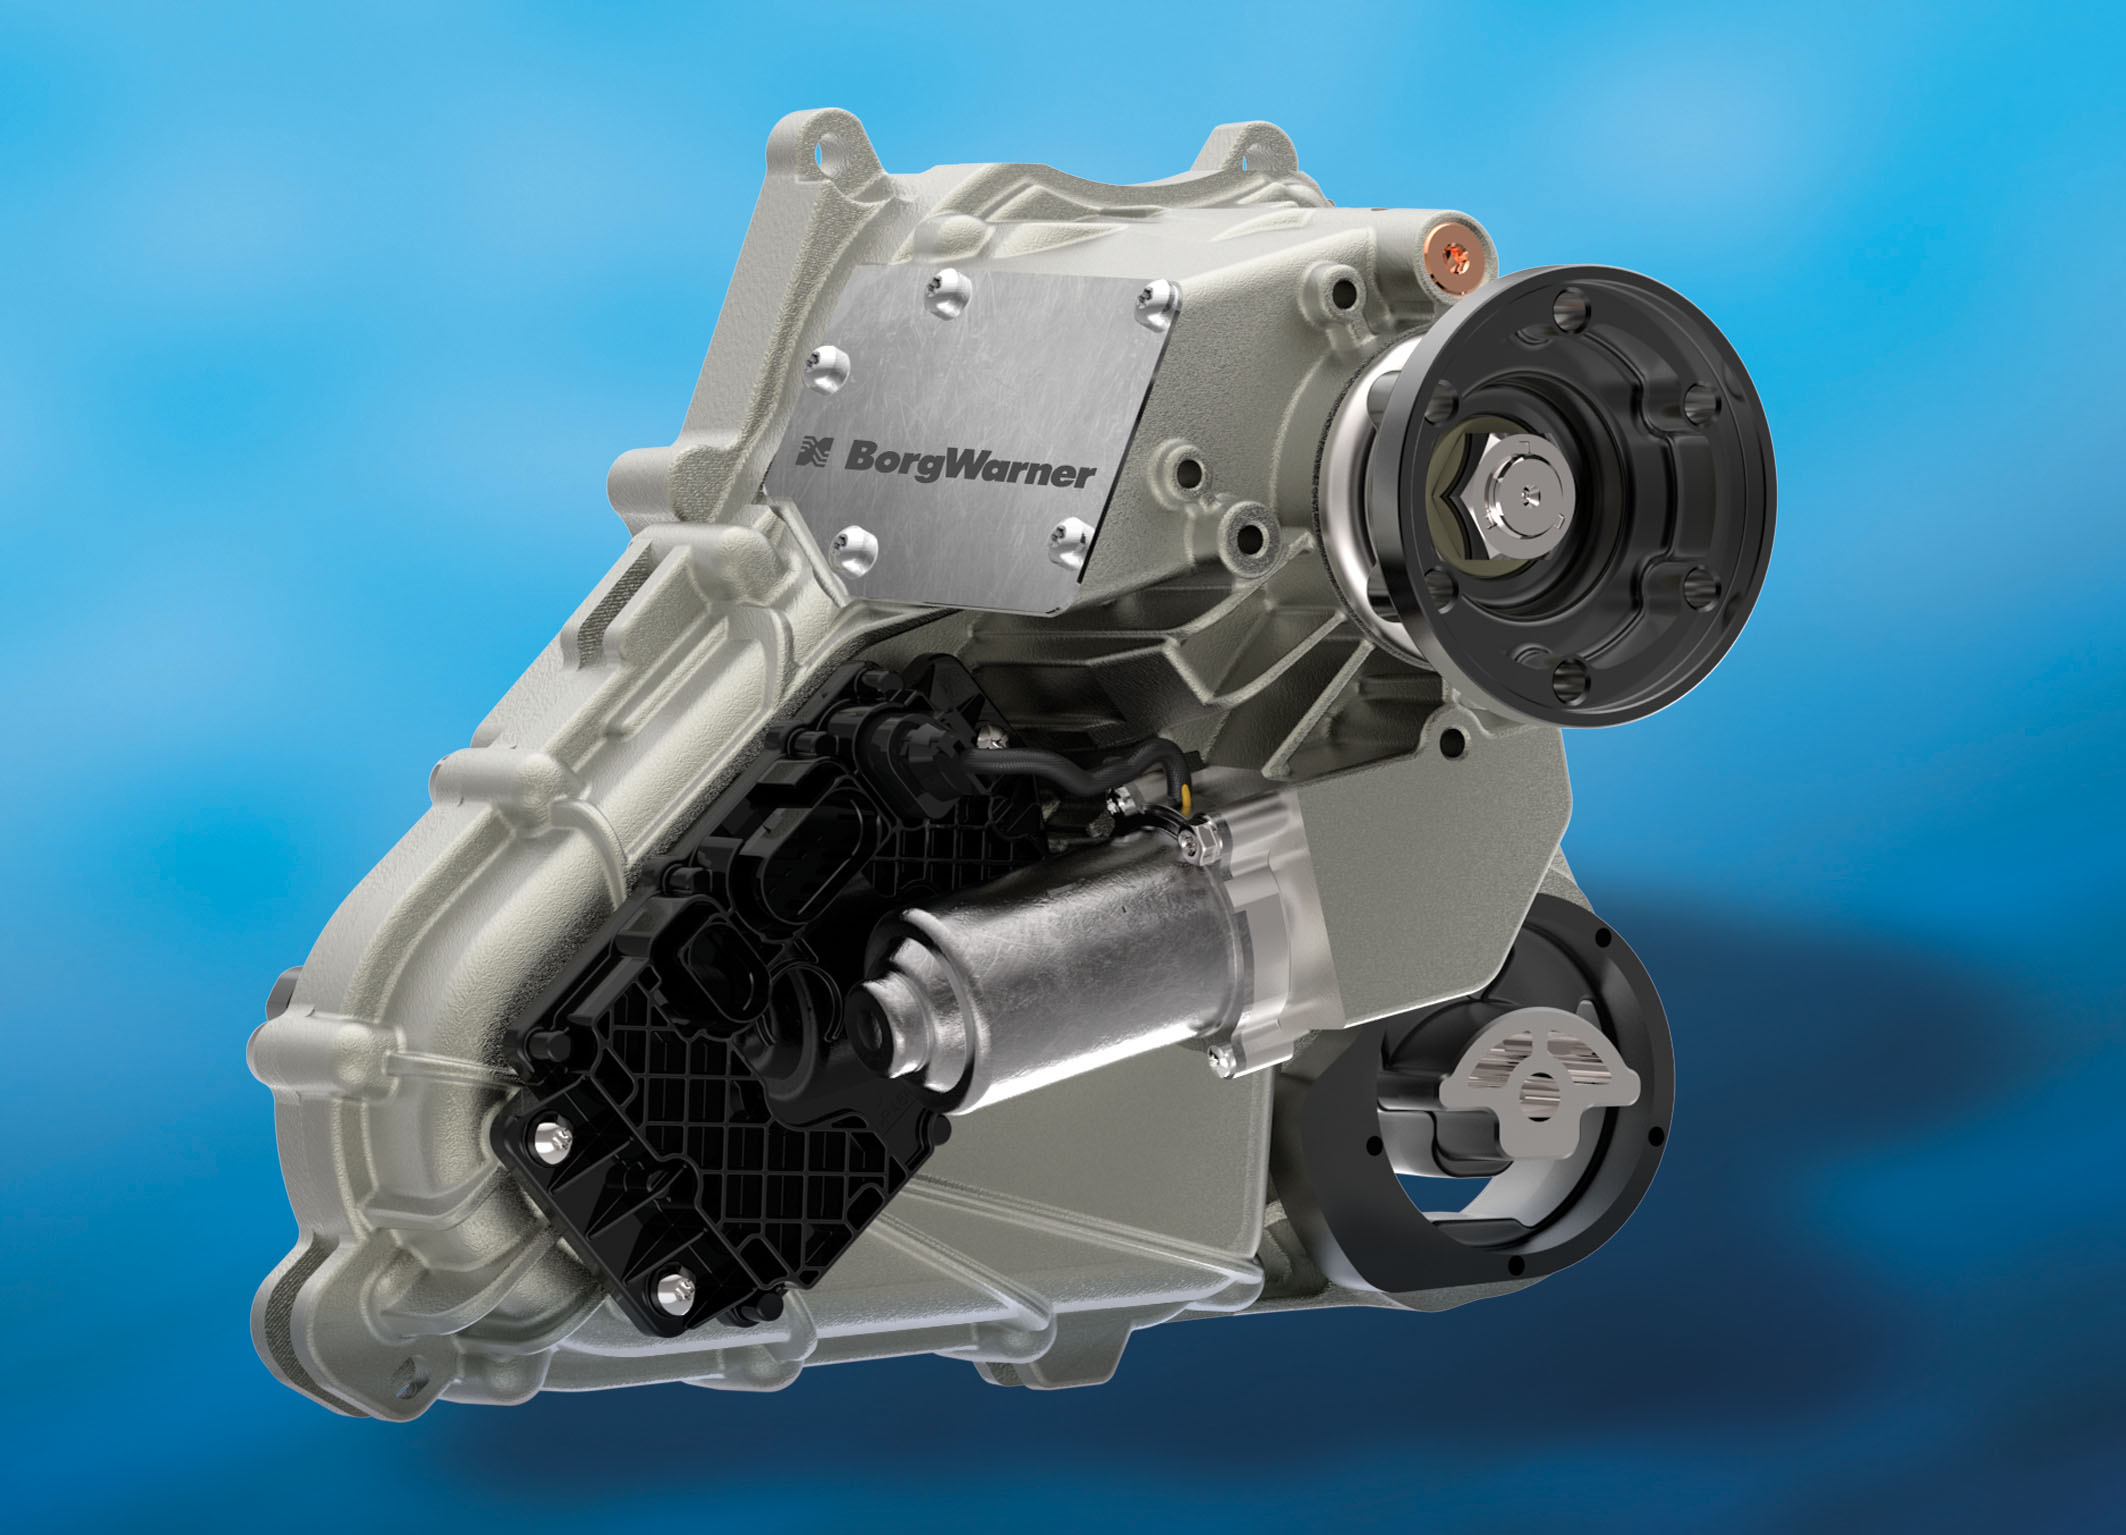 BorgWarner’s compact and lightweight on-demand transfer case provides enhanced response and torque accuracy for numerous Jaguar Land Rover vehicles.